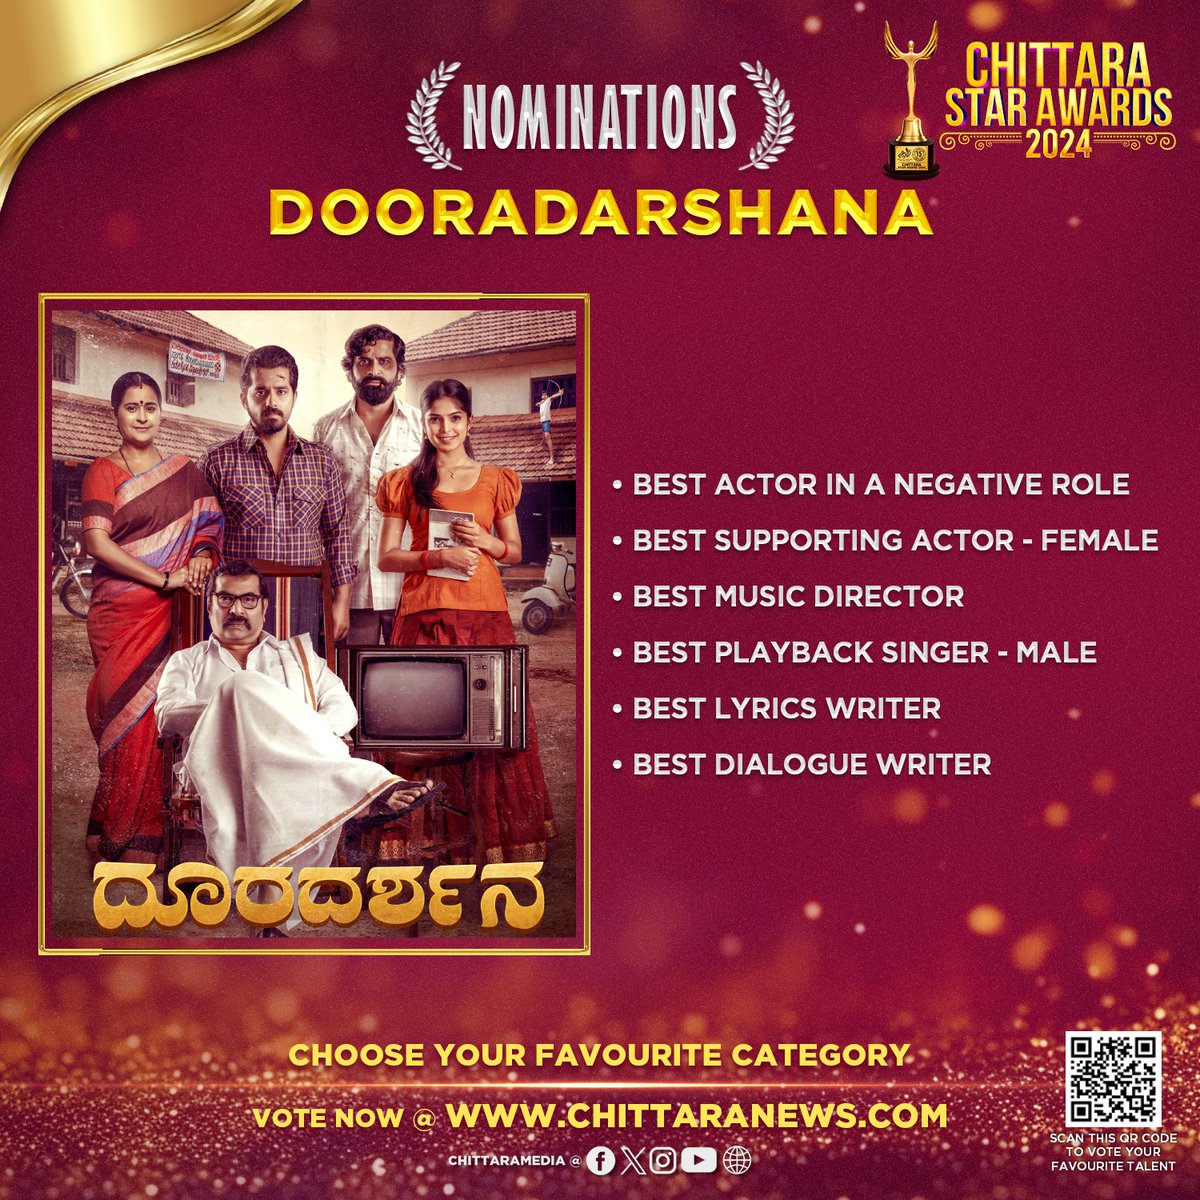 #Dooradarshana 06 Nominations at #ChittaraStarAwards2024 ! Global Voting is Now Live : awards.chittaranews.com/poll/780/ Vote now and show your love for Team #Dooradarshana #ChittaraStarAwards2024 #CSA2024 #ChittaraStarAwards